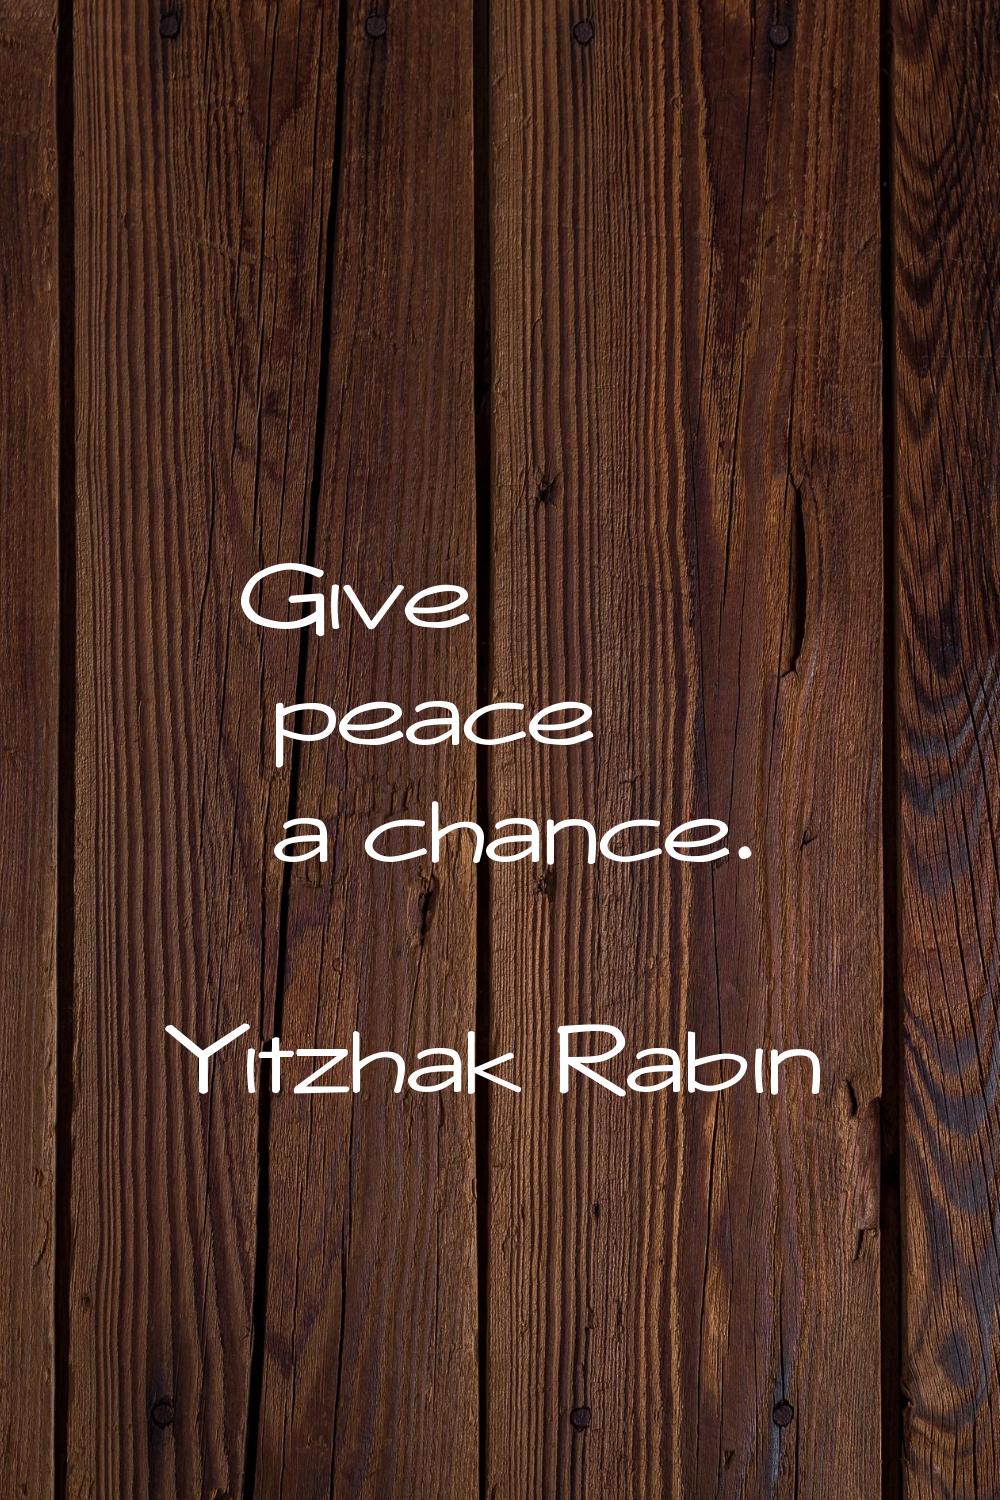 Give peace a chance.